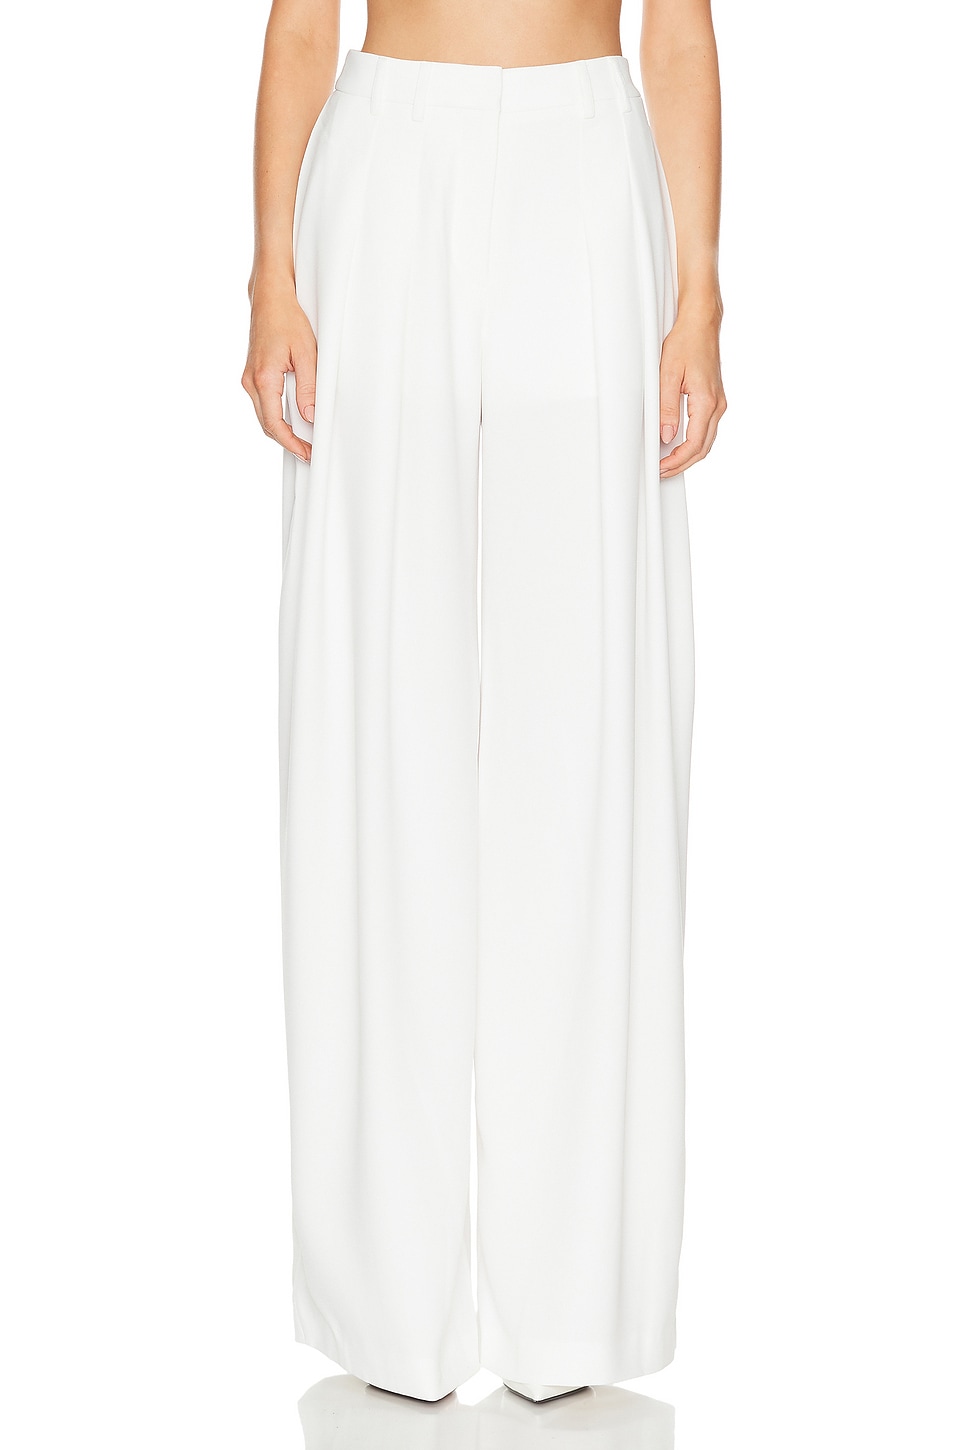 Image 1 of MONOT Pleated Pant in White